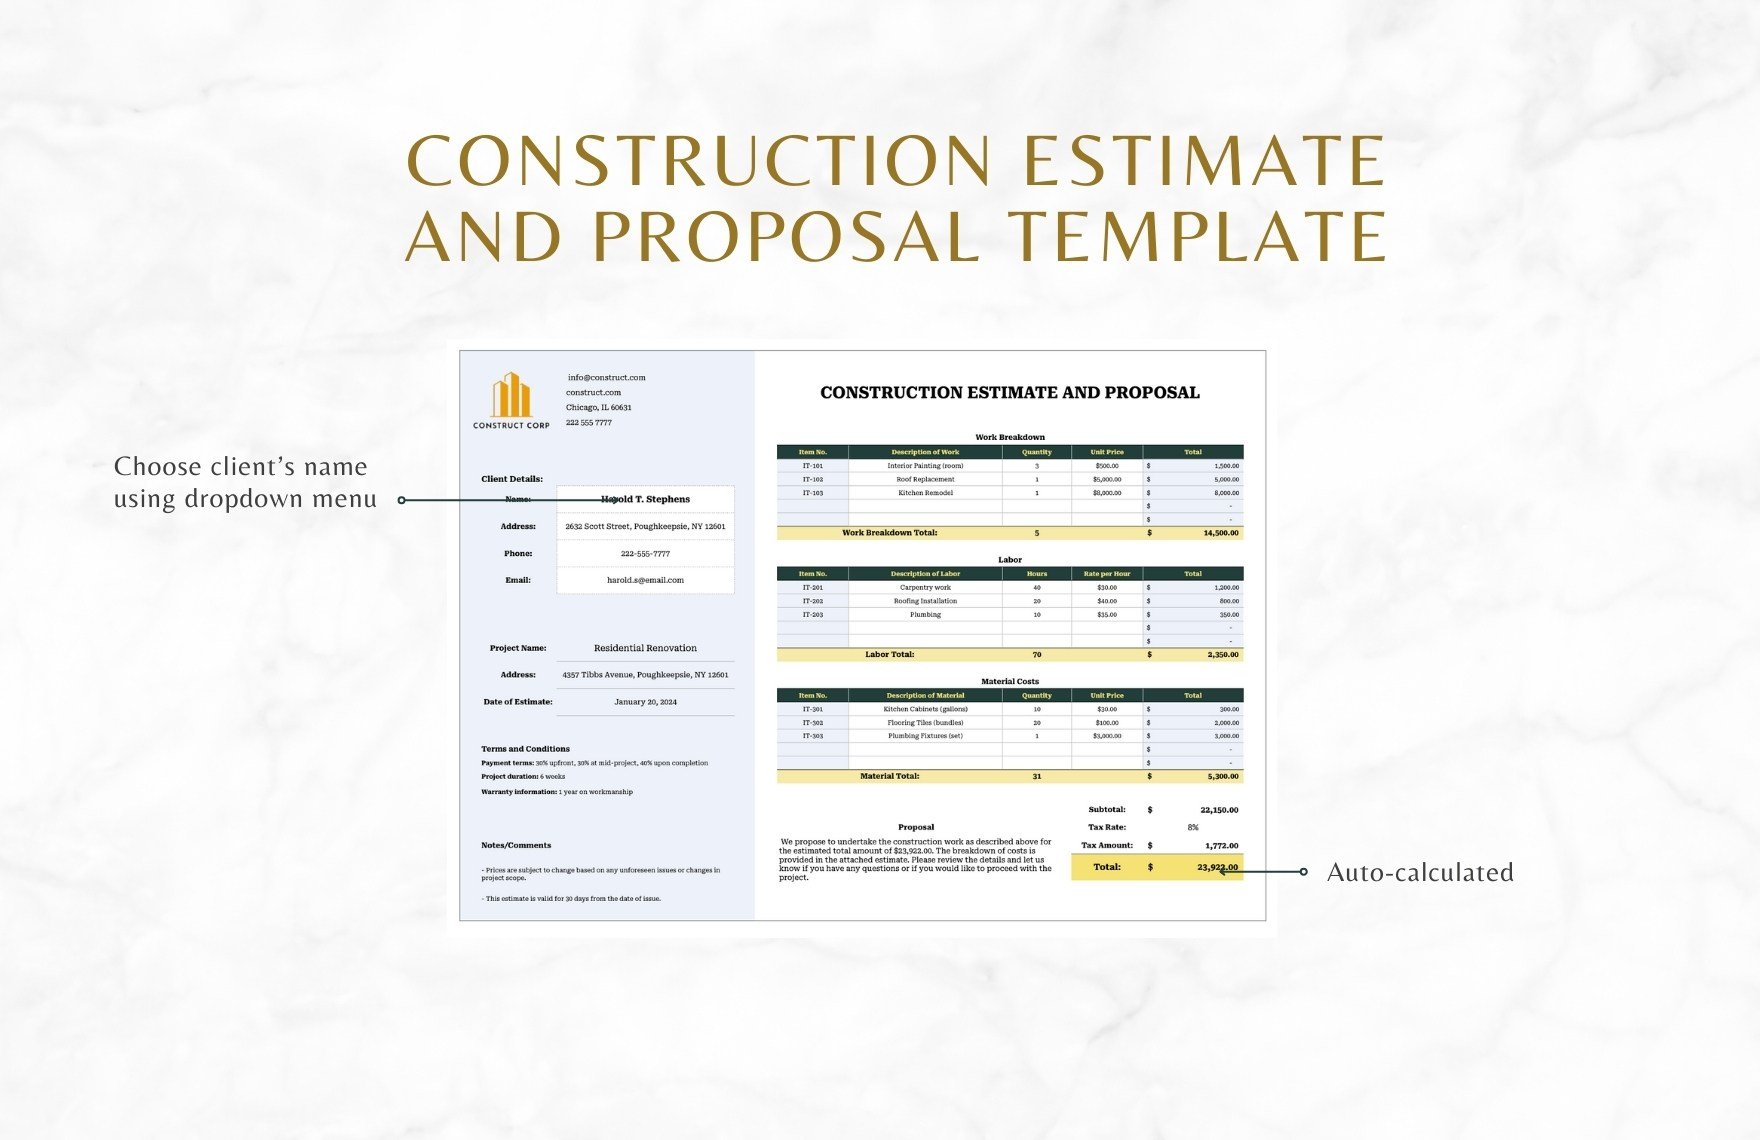 Construction Estimate and Proposal Template